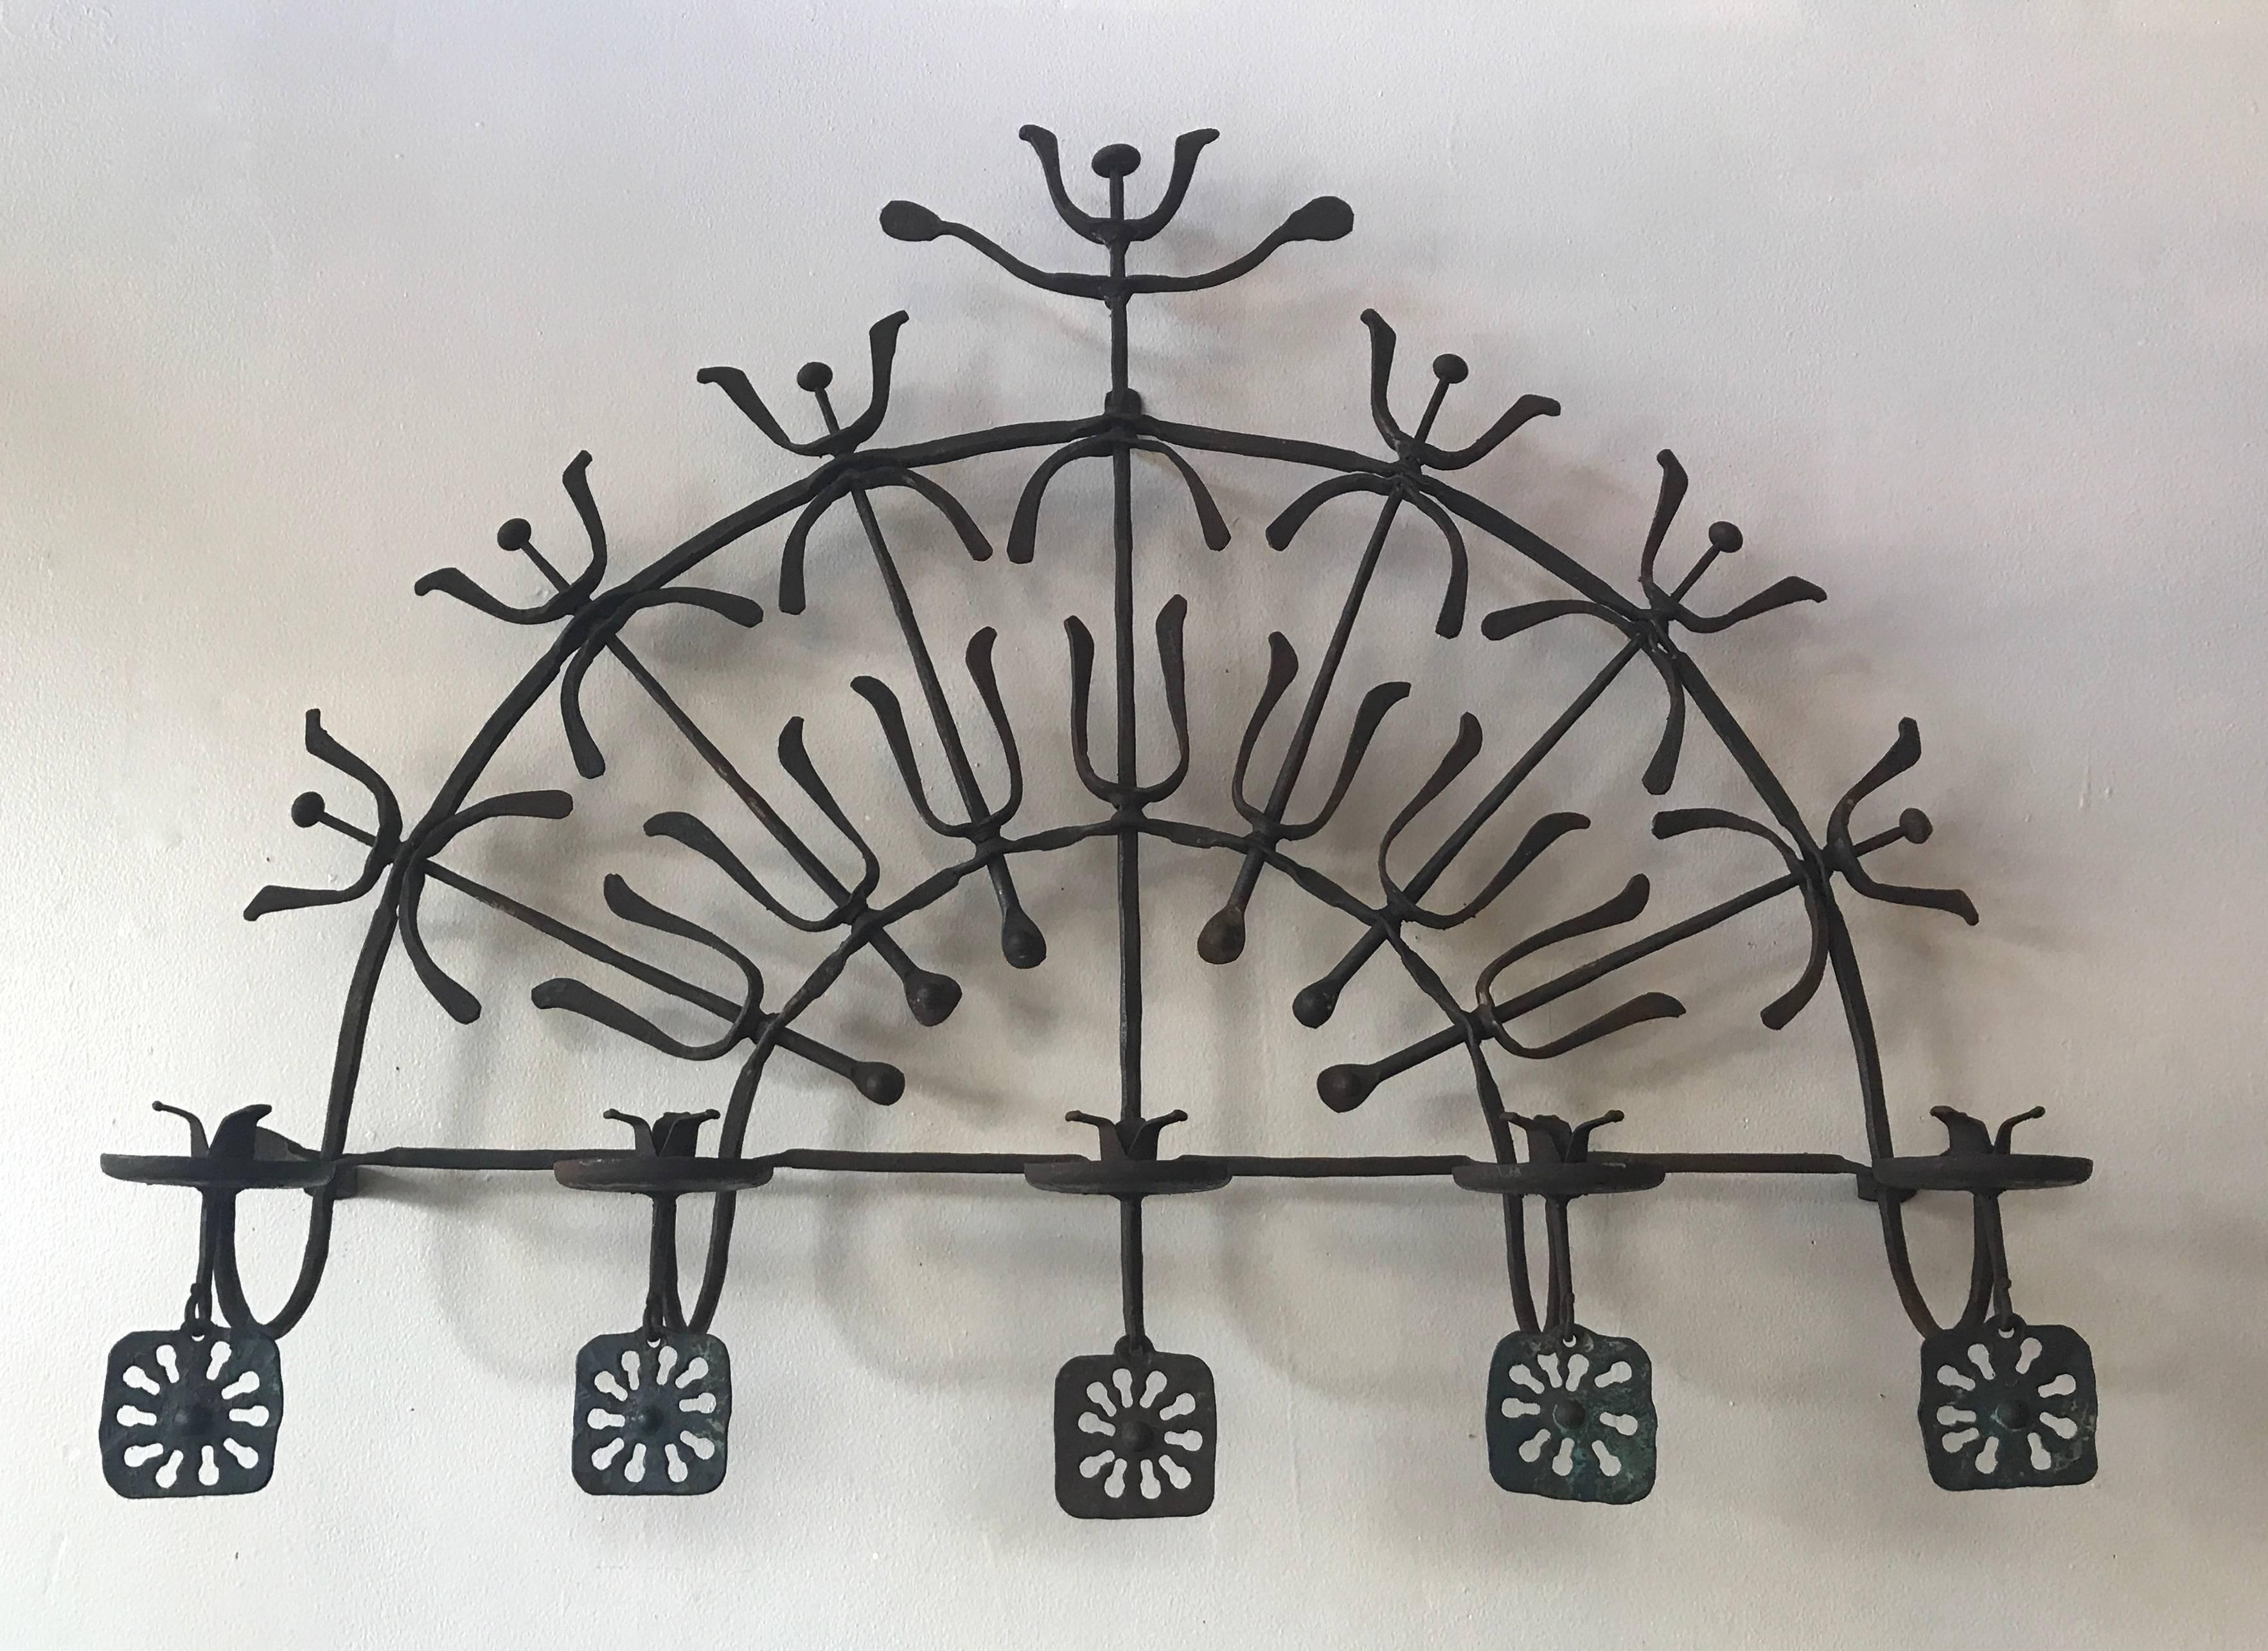 California blacksmith artist C. Carl Jennings hand-forged iron candelabra created in the 1960s in his studio El Diablo Forge in Lafayette east of Berkeley which he open in 1947. The candelabra has a series of five medallions reminiscent of suns and